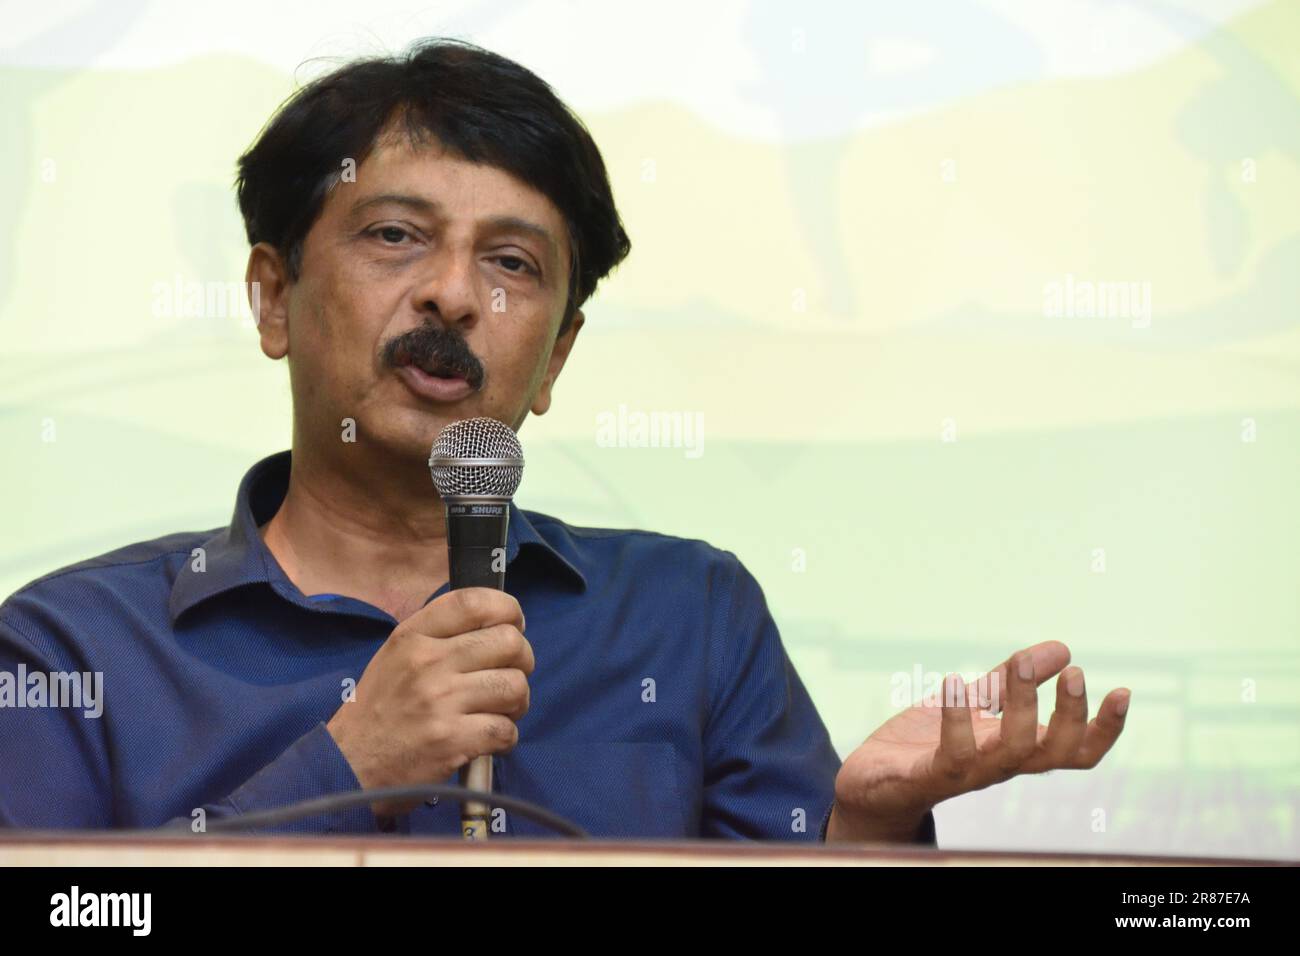 Kolkata, India. 19th June, 2023. Pramod Grover, Director-In-Charge, Science City, talking at a press meet for upcoming event, celebration of the International Day of Yoga with about 500 underprivileged children and school children in the Science City premises on June 21, 2023. The event will be a one-of-a-kind initiative at the heart of the city as several dignitaries and sports personalities. It will be organised jointly by Science City, Kolkata and The Kidney Care Society. (Photo by Biswarup Ganguly/Pacific Press) Credit: Pacific Press Media Production Corp./Alamy Live News Stock Photo